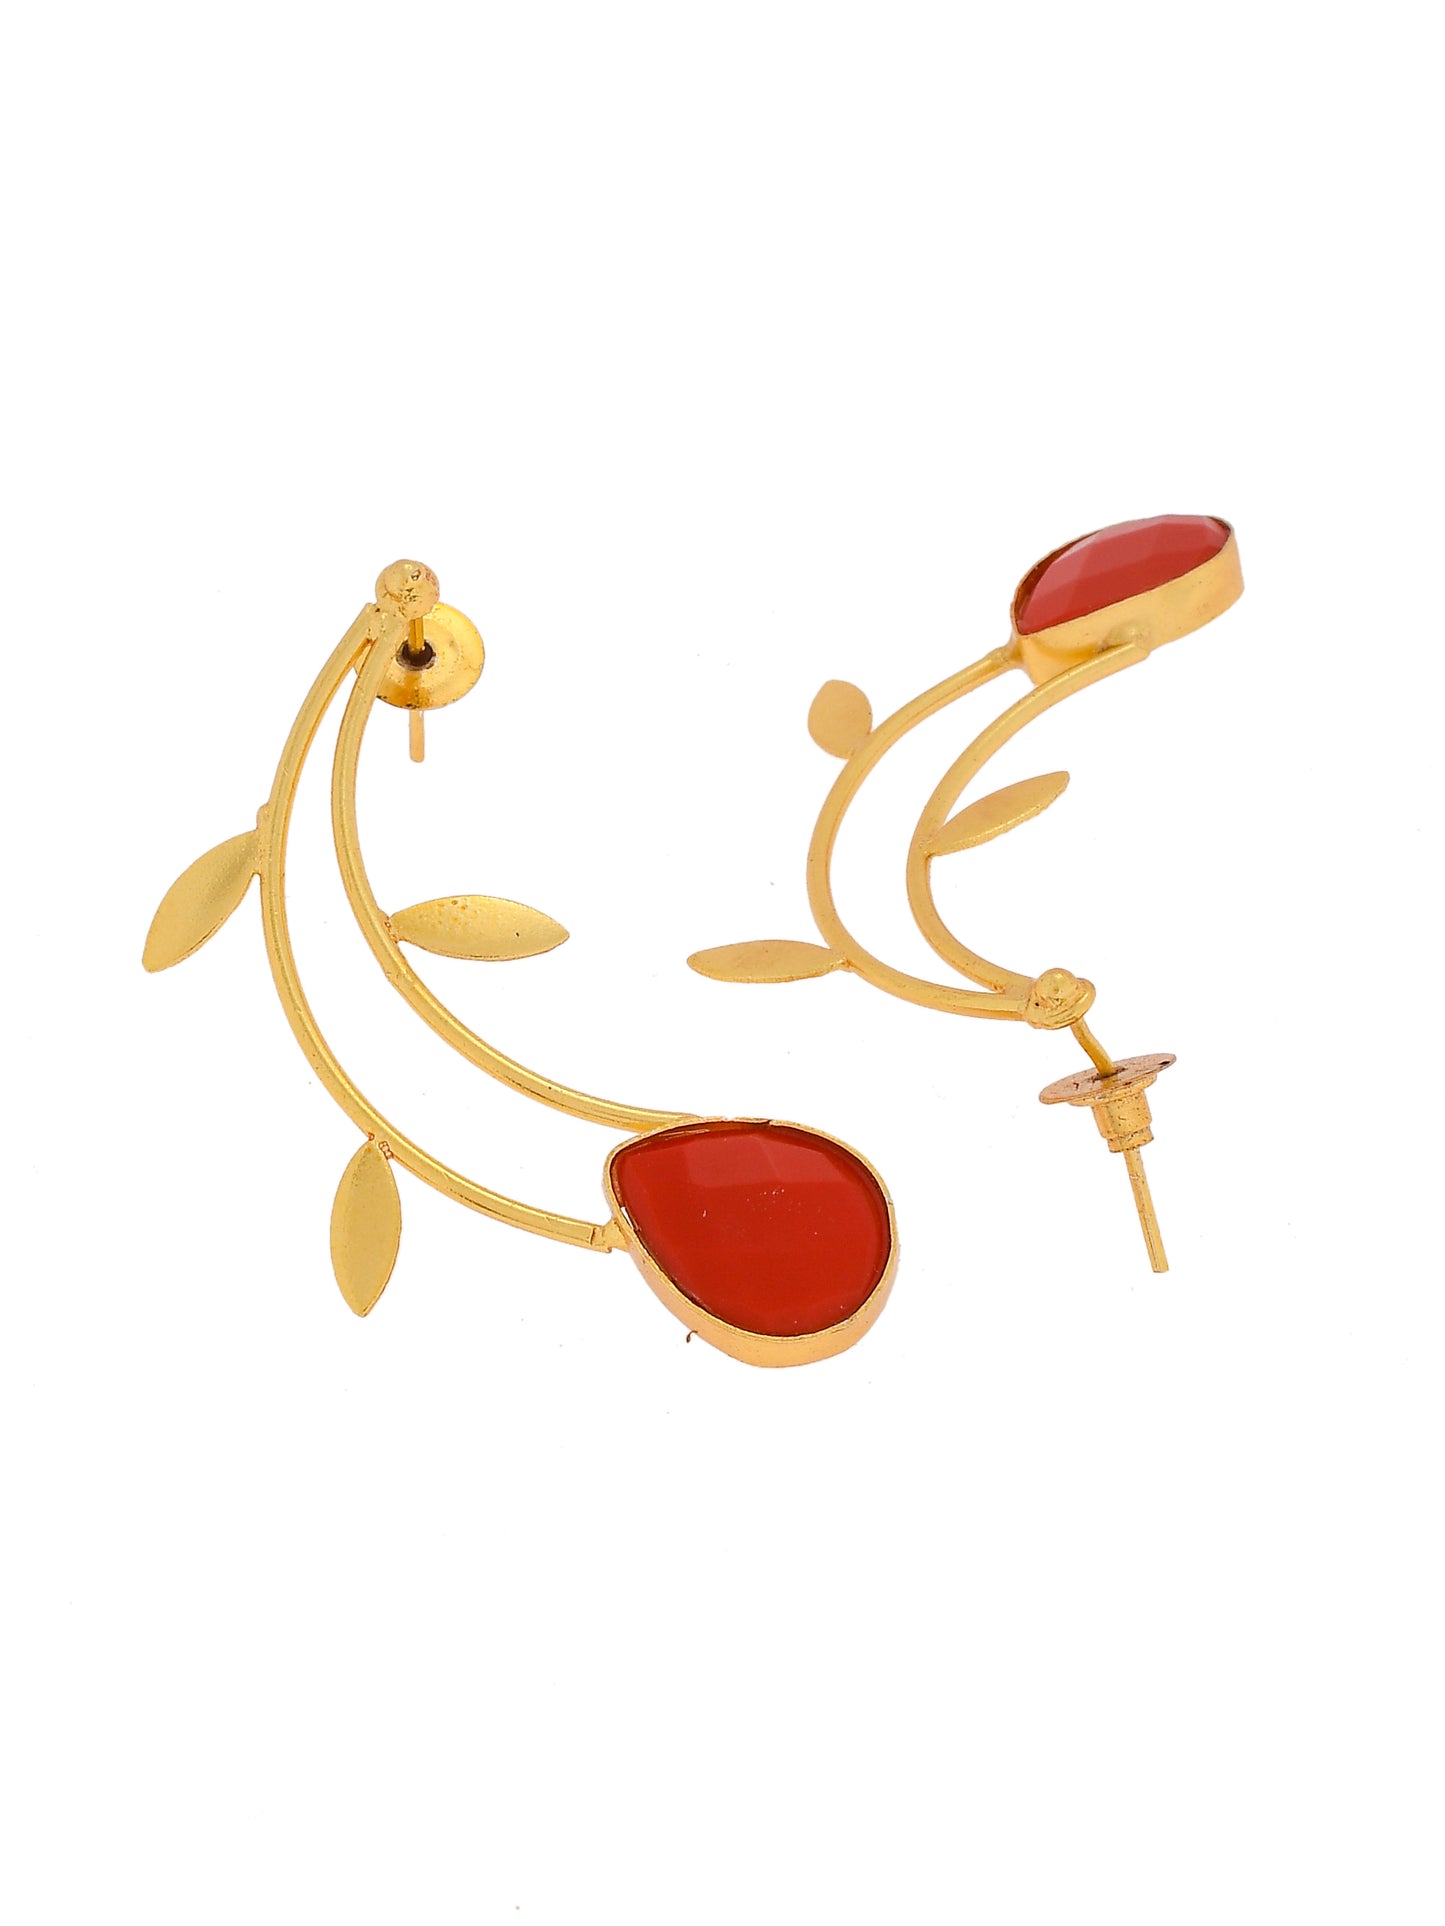 Gold-Plated Leaf Shaped Drop Earrings